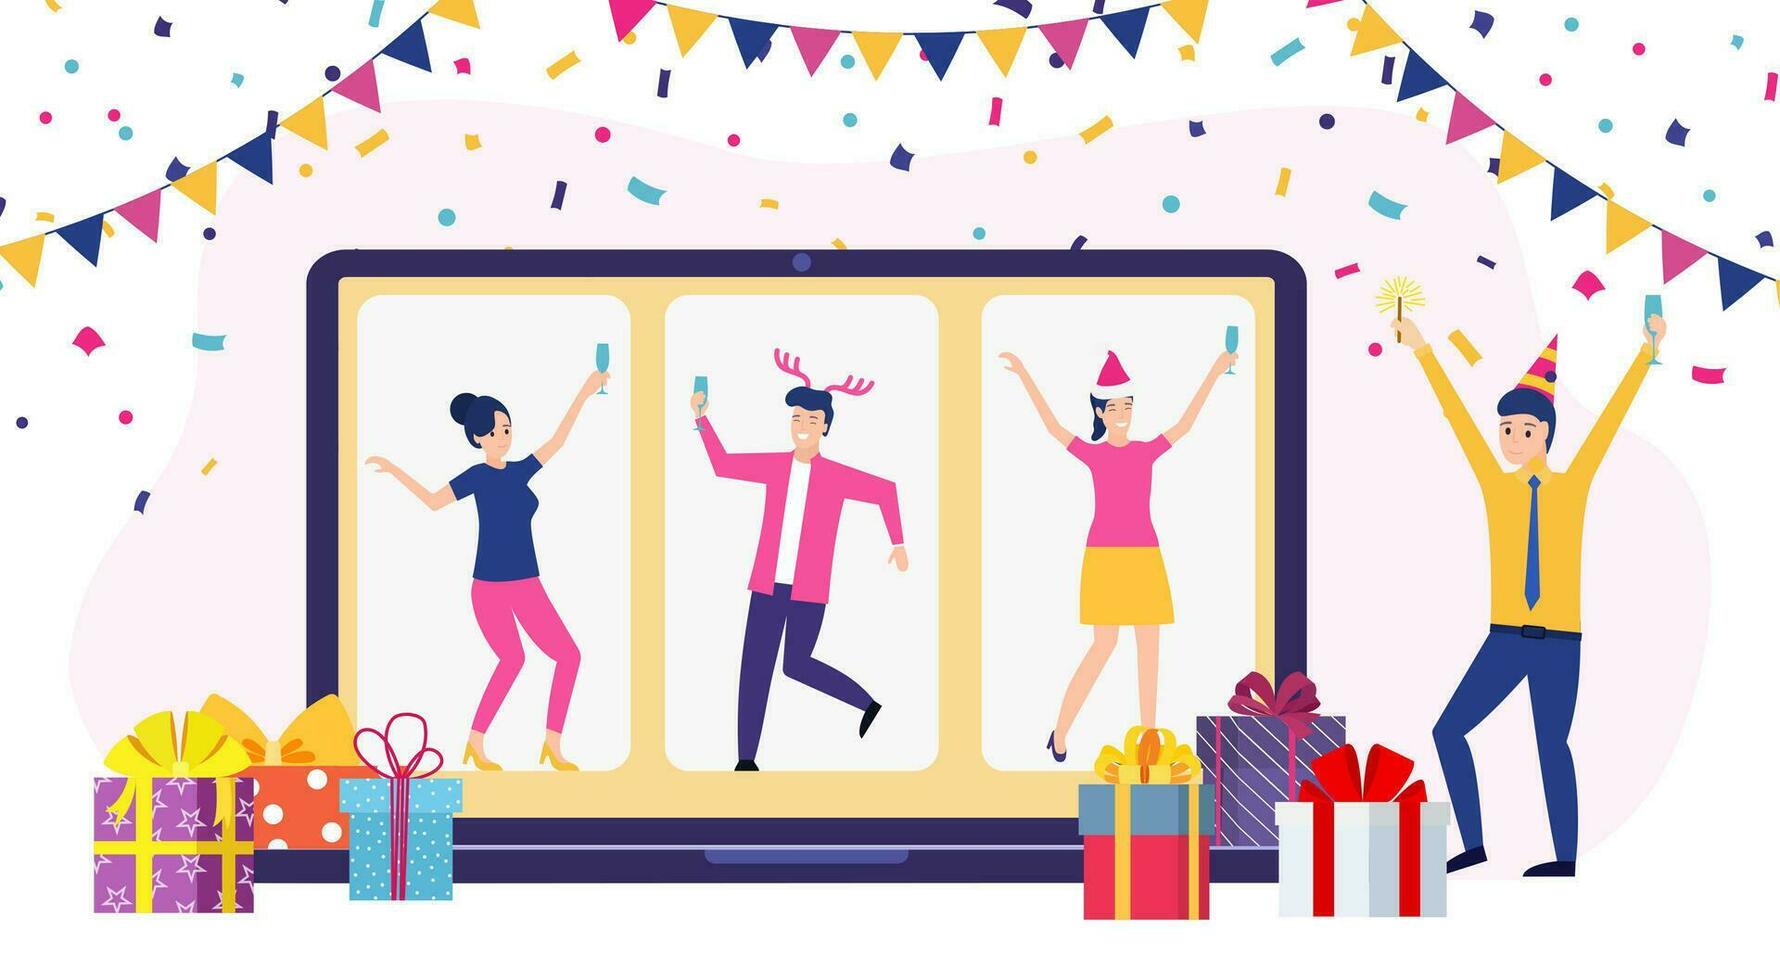 Online party, birthday, meeting friends. People drink wine together in quarantine. Video chat. Birthday party web camera and online holiday. Vector illustration in flat style